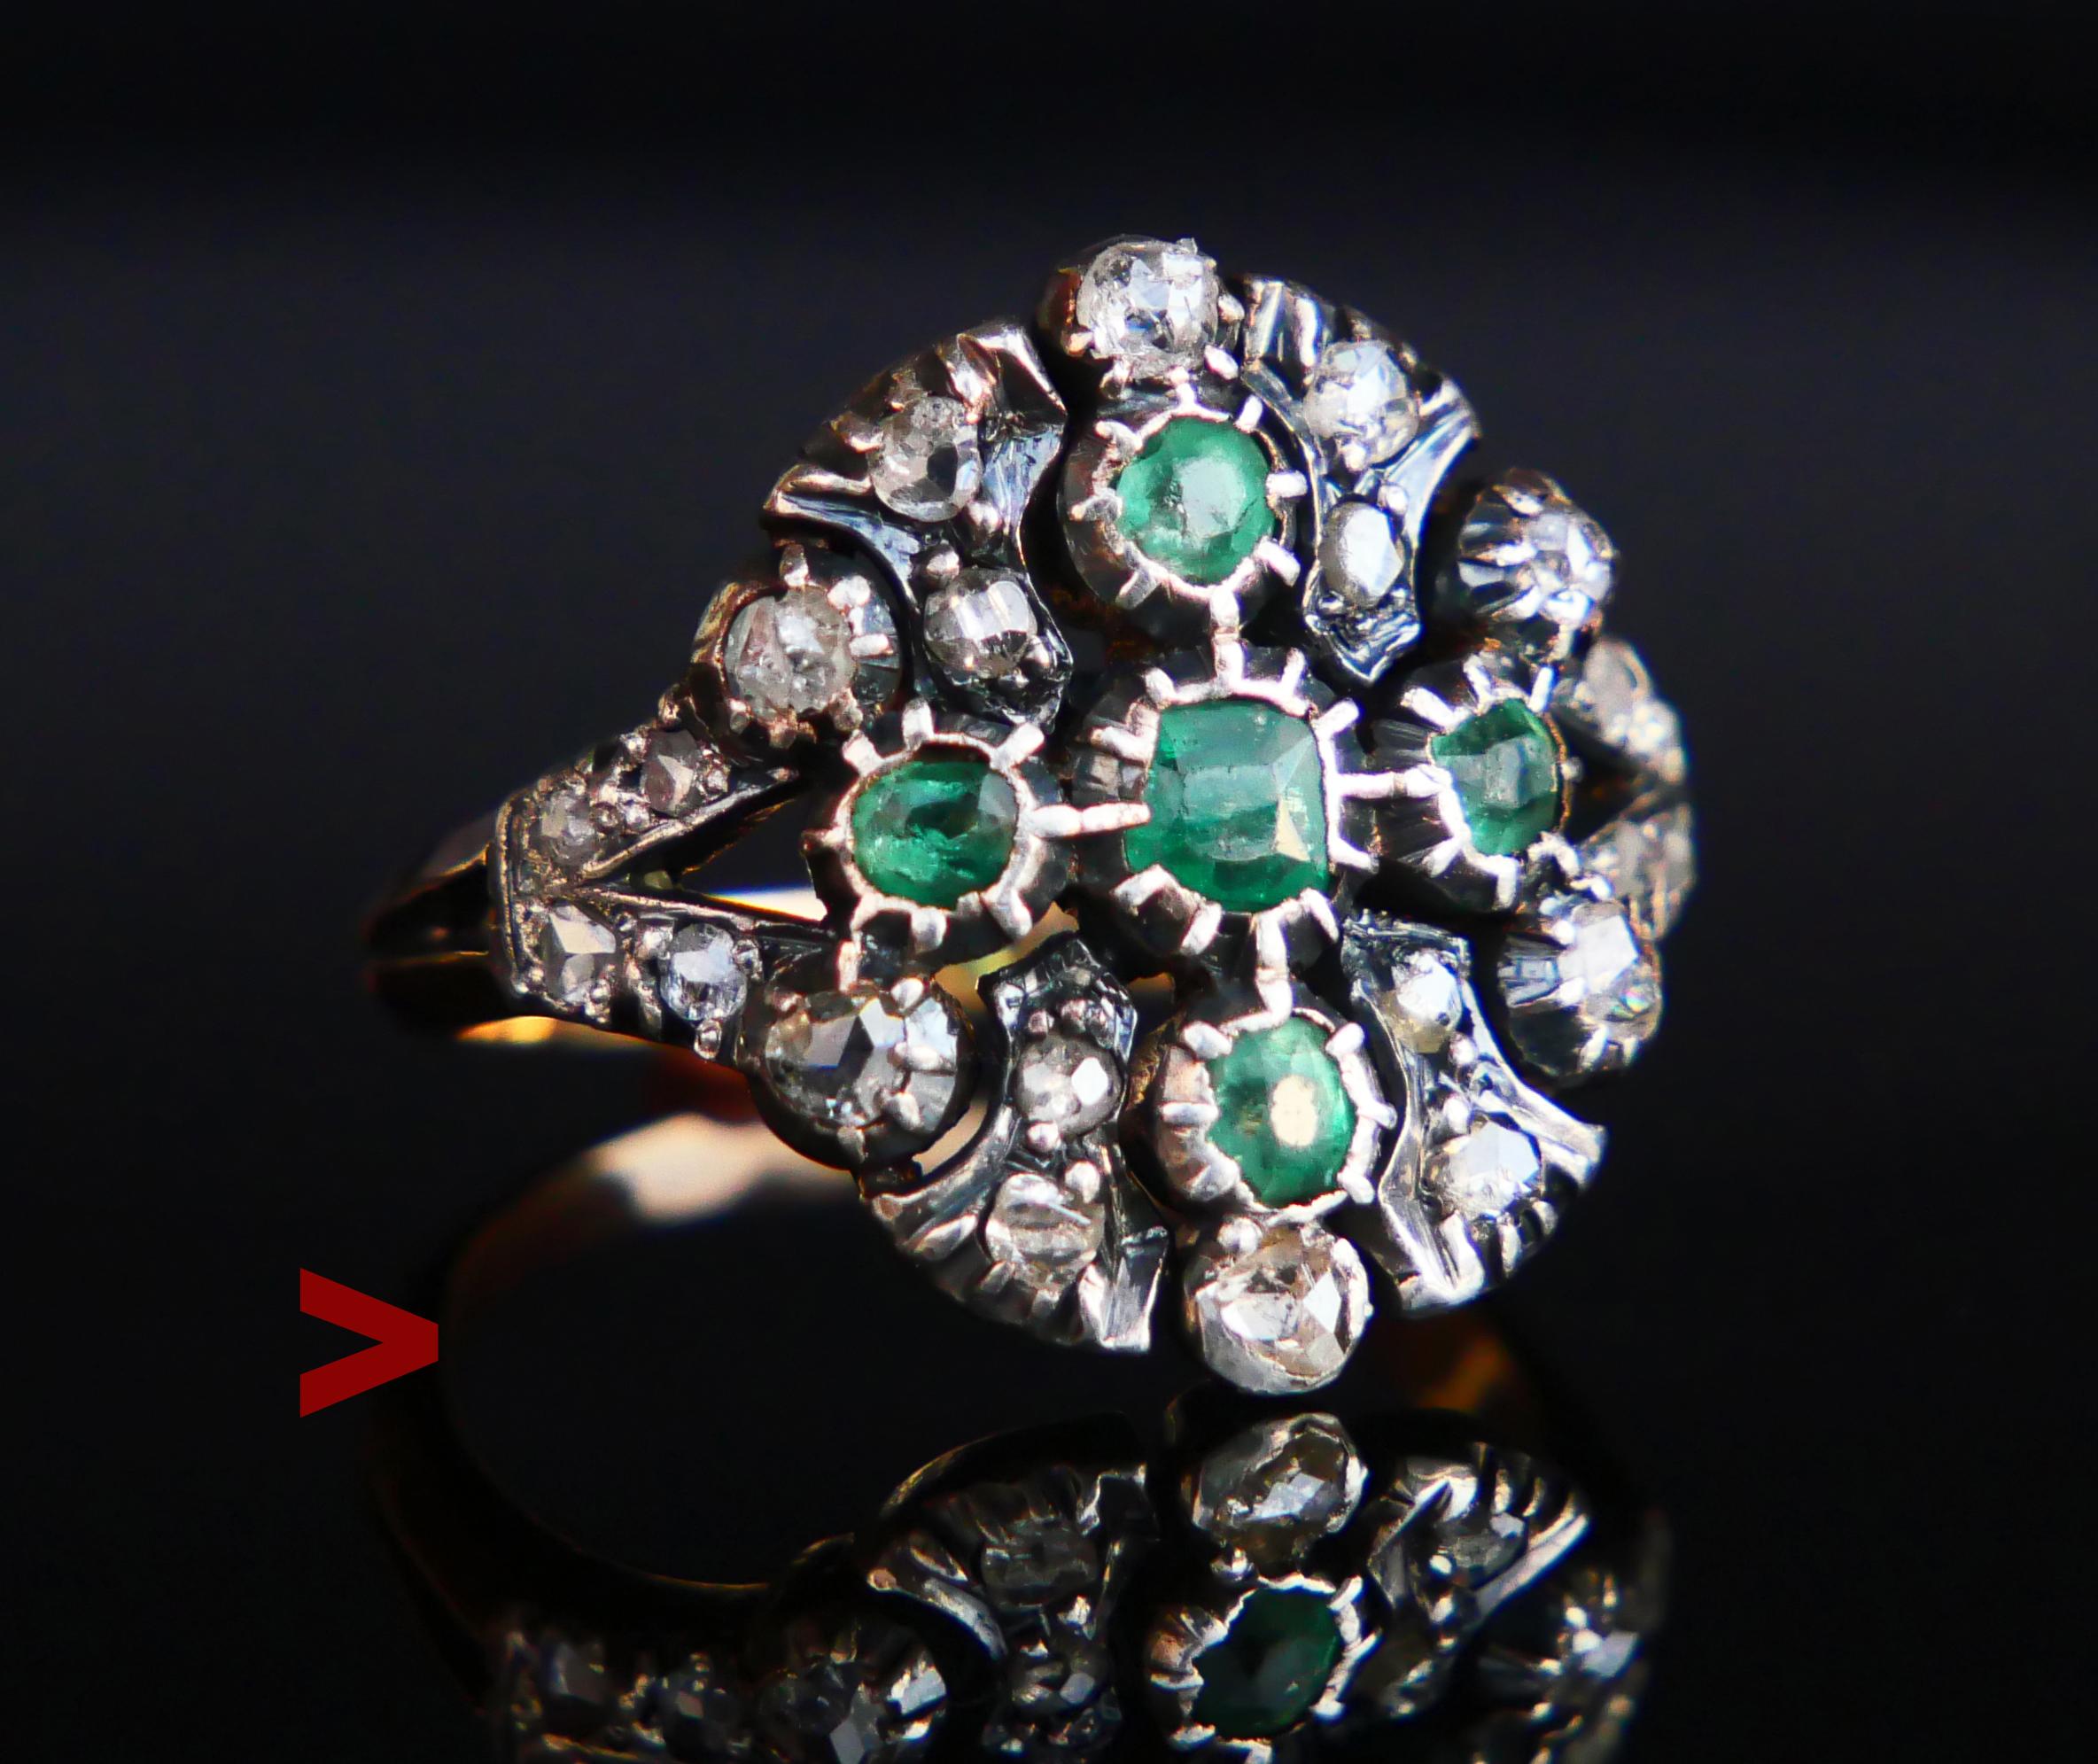 
Beautiful old cluster Ring hand - made ca. early XX cent. with parts in solid 18K Yellow Gold with Silver clusters on top of the crown holding 5 natural Emeralds and 22 Diamonds.

Not Hallmarked, band tested solid 18K. Openwork floret/crown is a